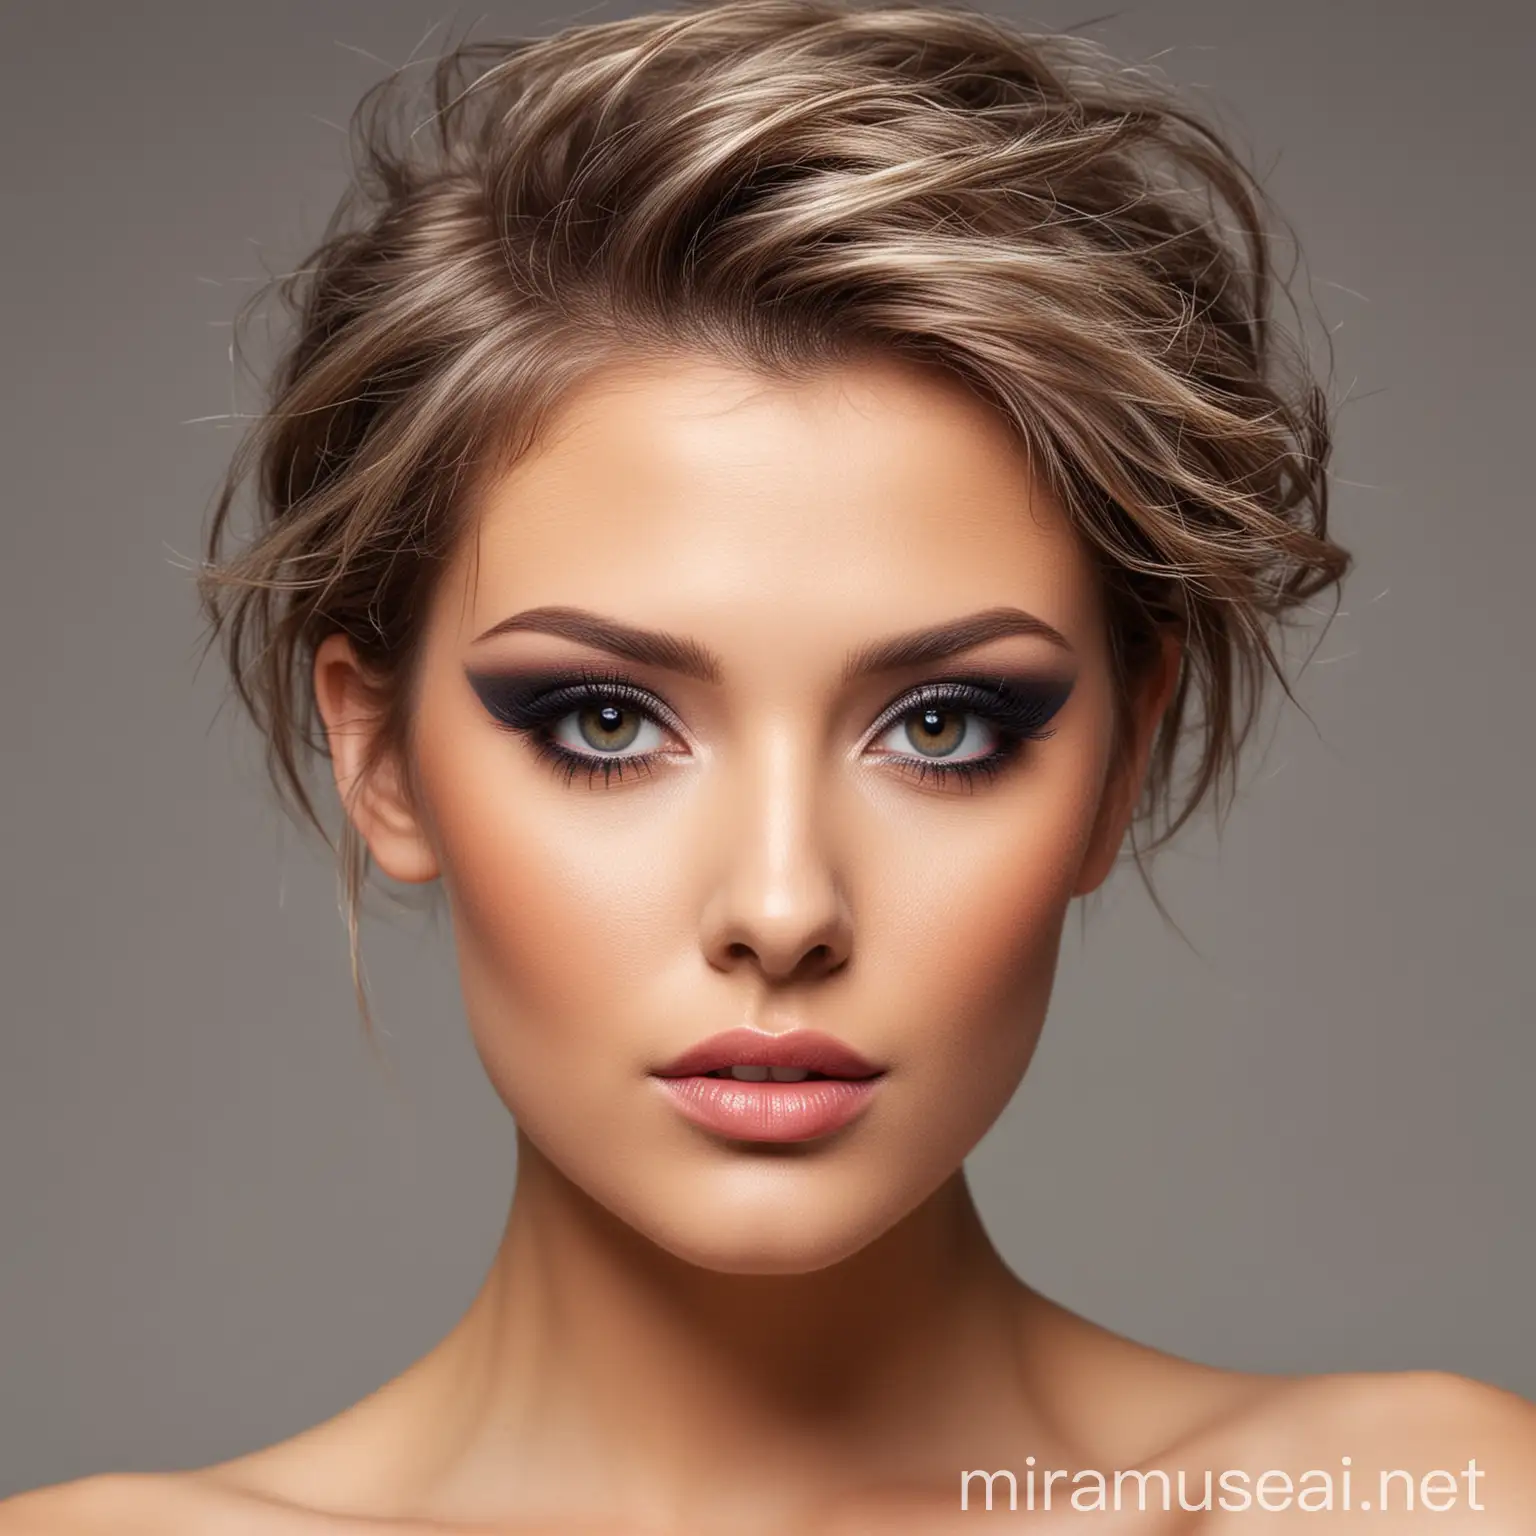 makeup model with stylish hair 